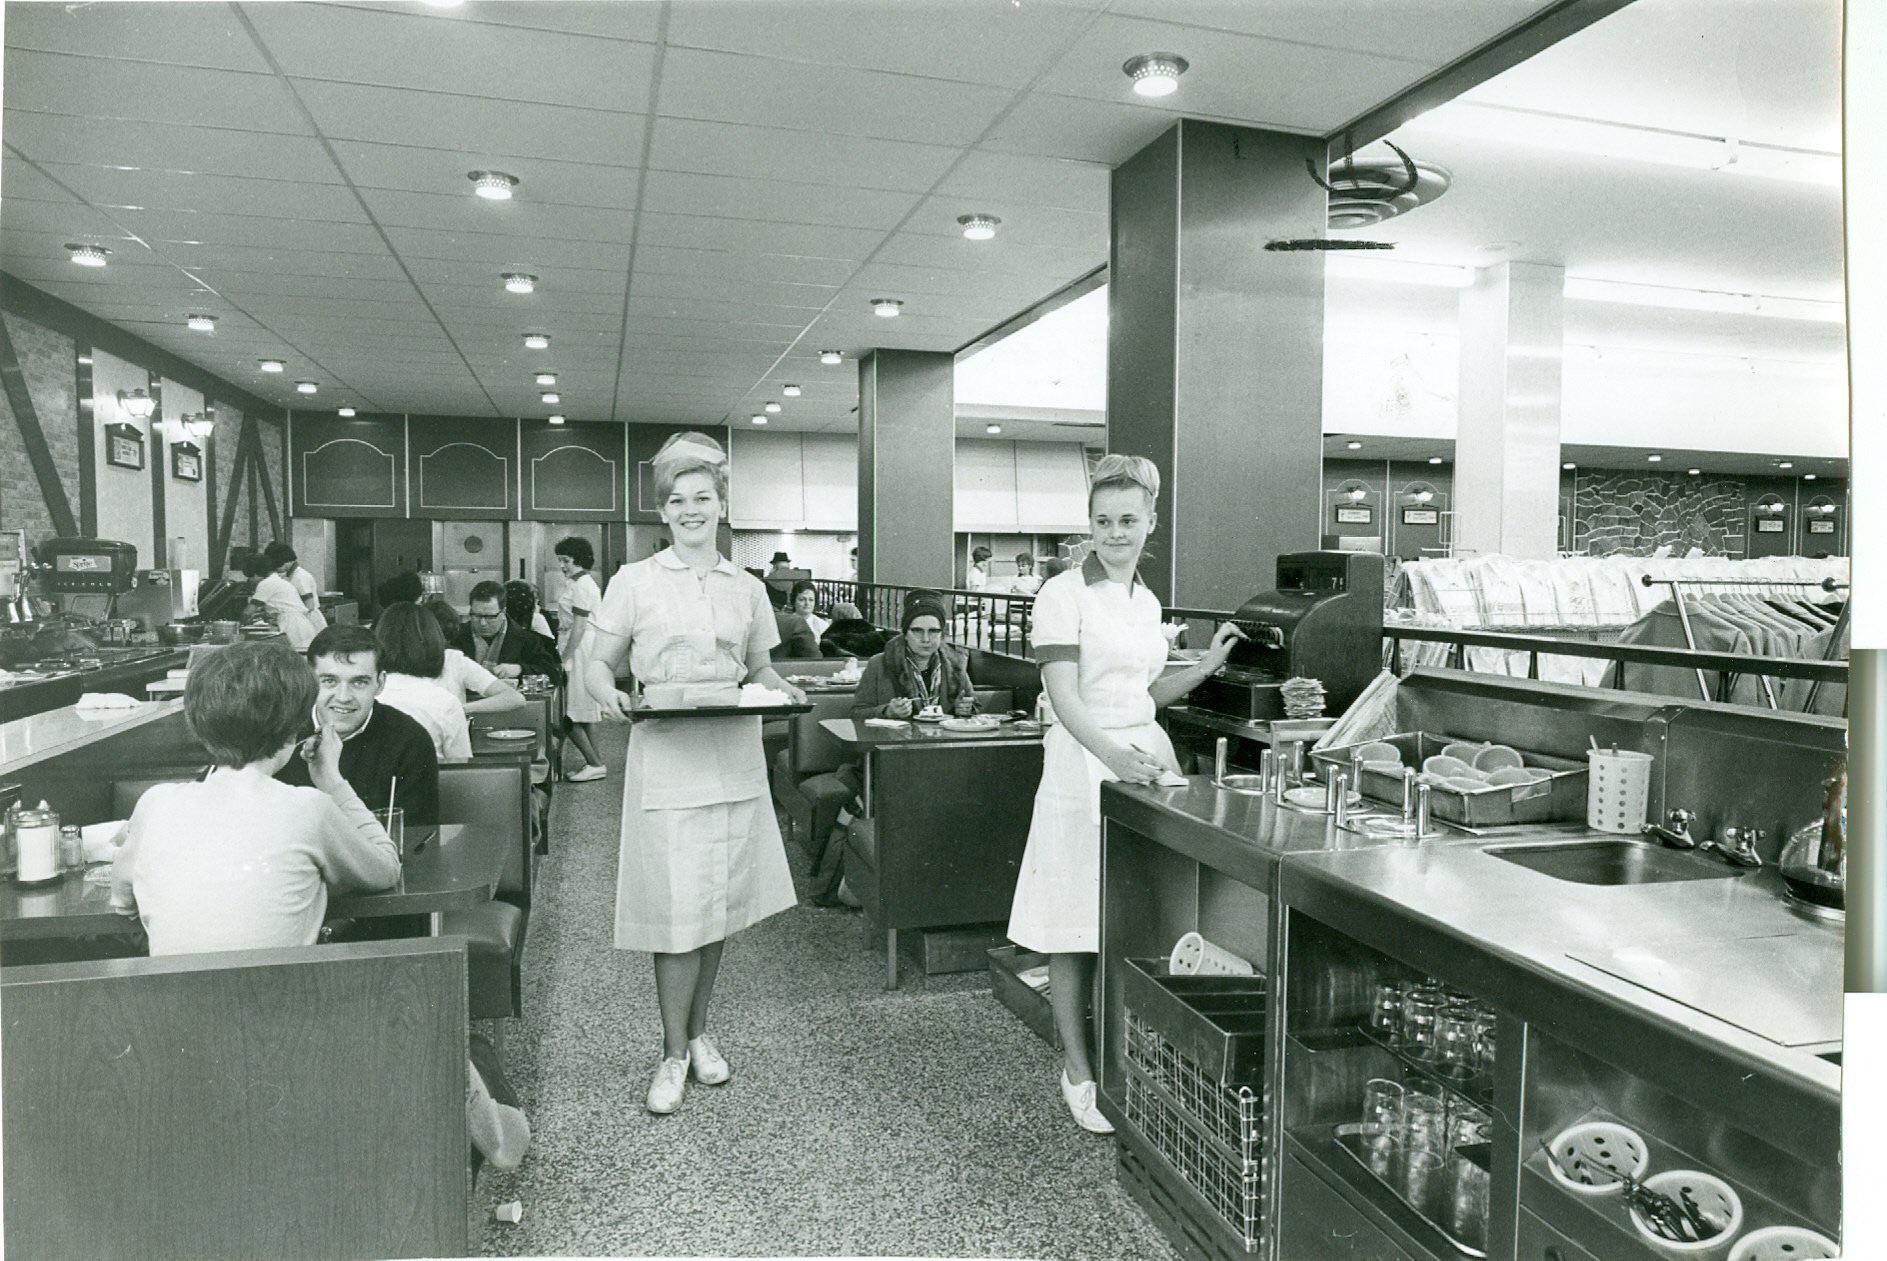 In the new restaurant expansion of Woolworth’s lunch counter, New Jersey, 1966.jpg